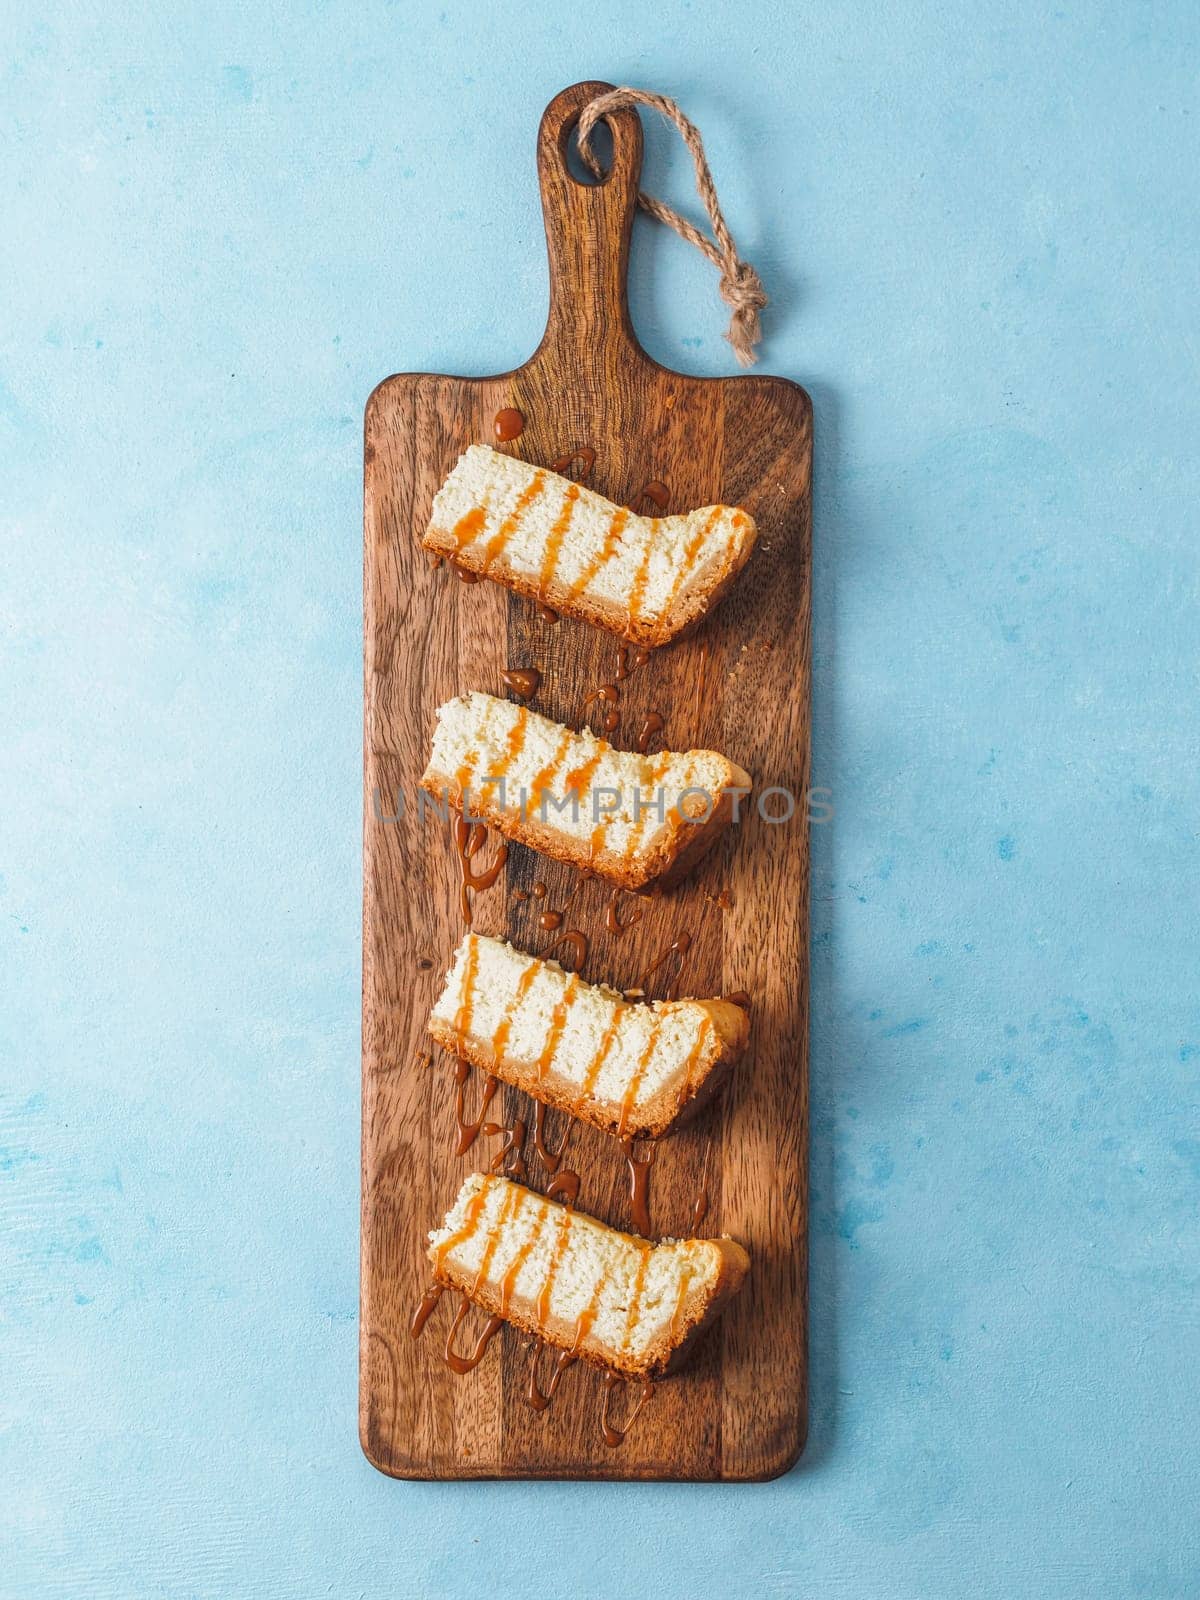 caramelized cheesecake slices on wooden cuttingboard. Cheesecake on blue background with copy space for text. Top view or flat lay. Vertical.